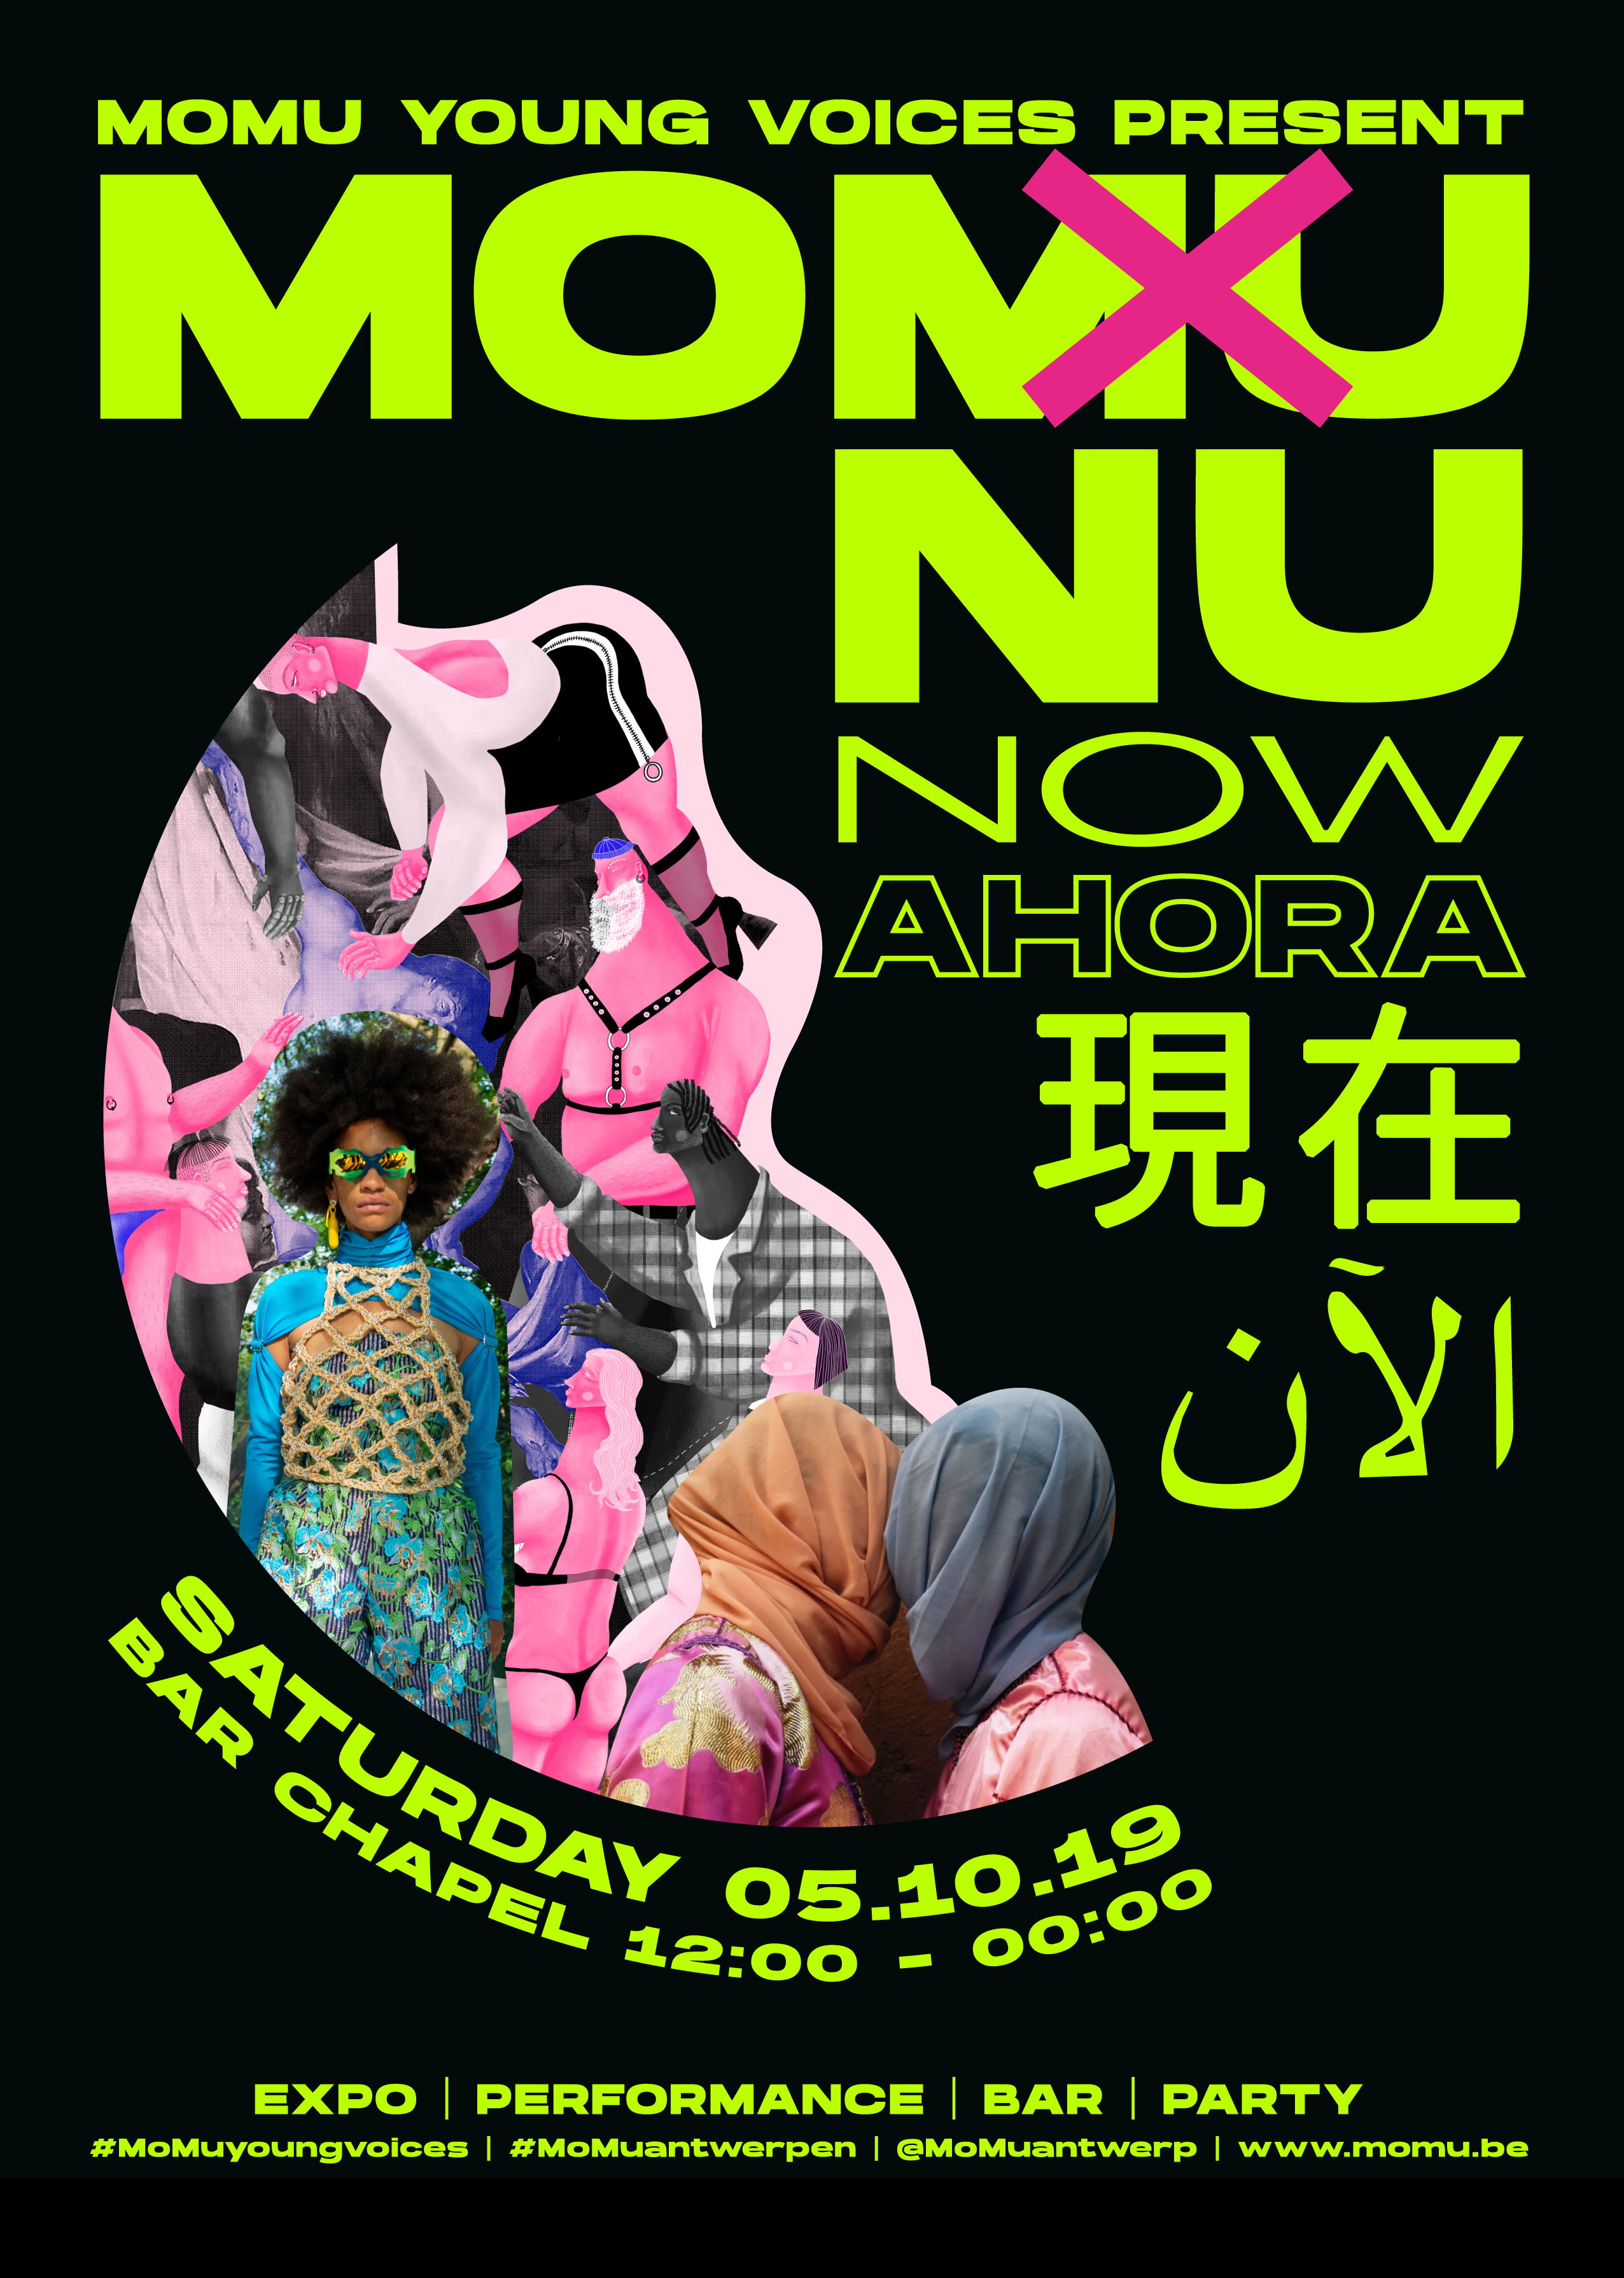 MoMu Young Voices, graphic design: Laura Helmer